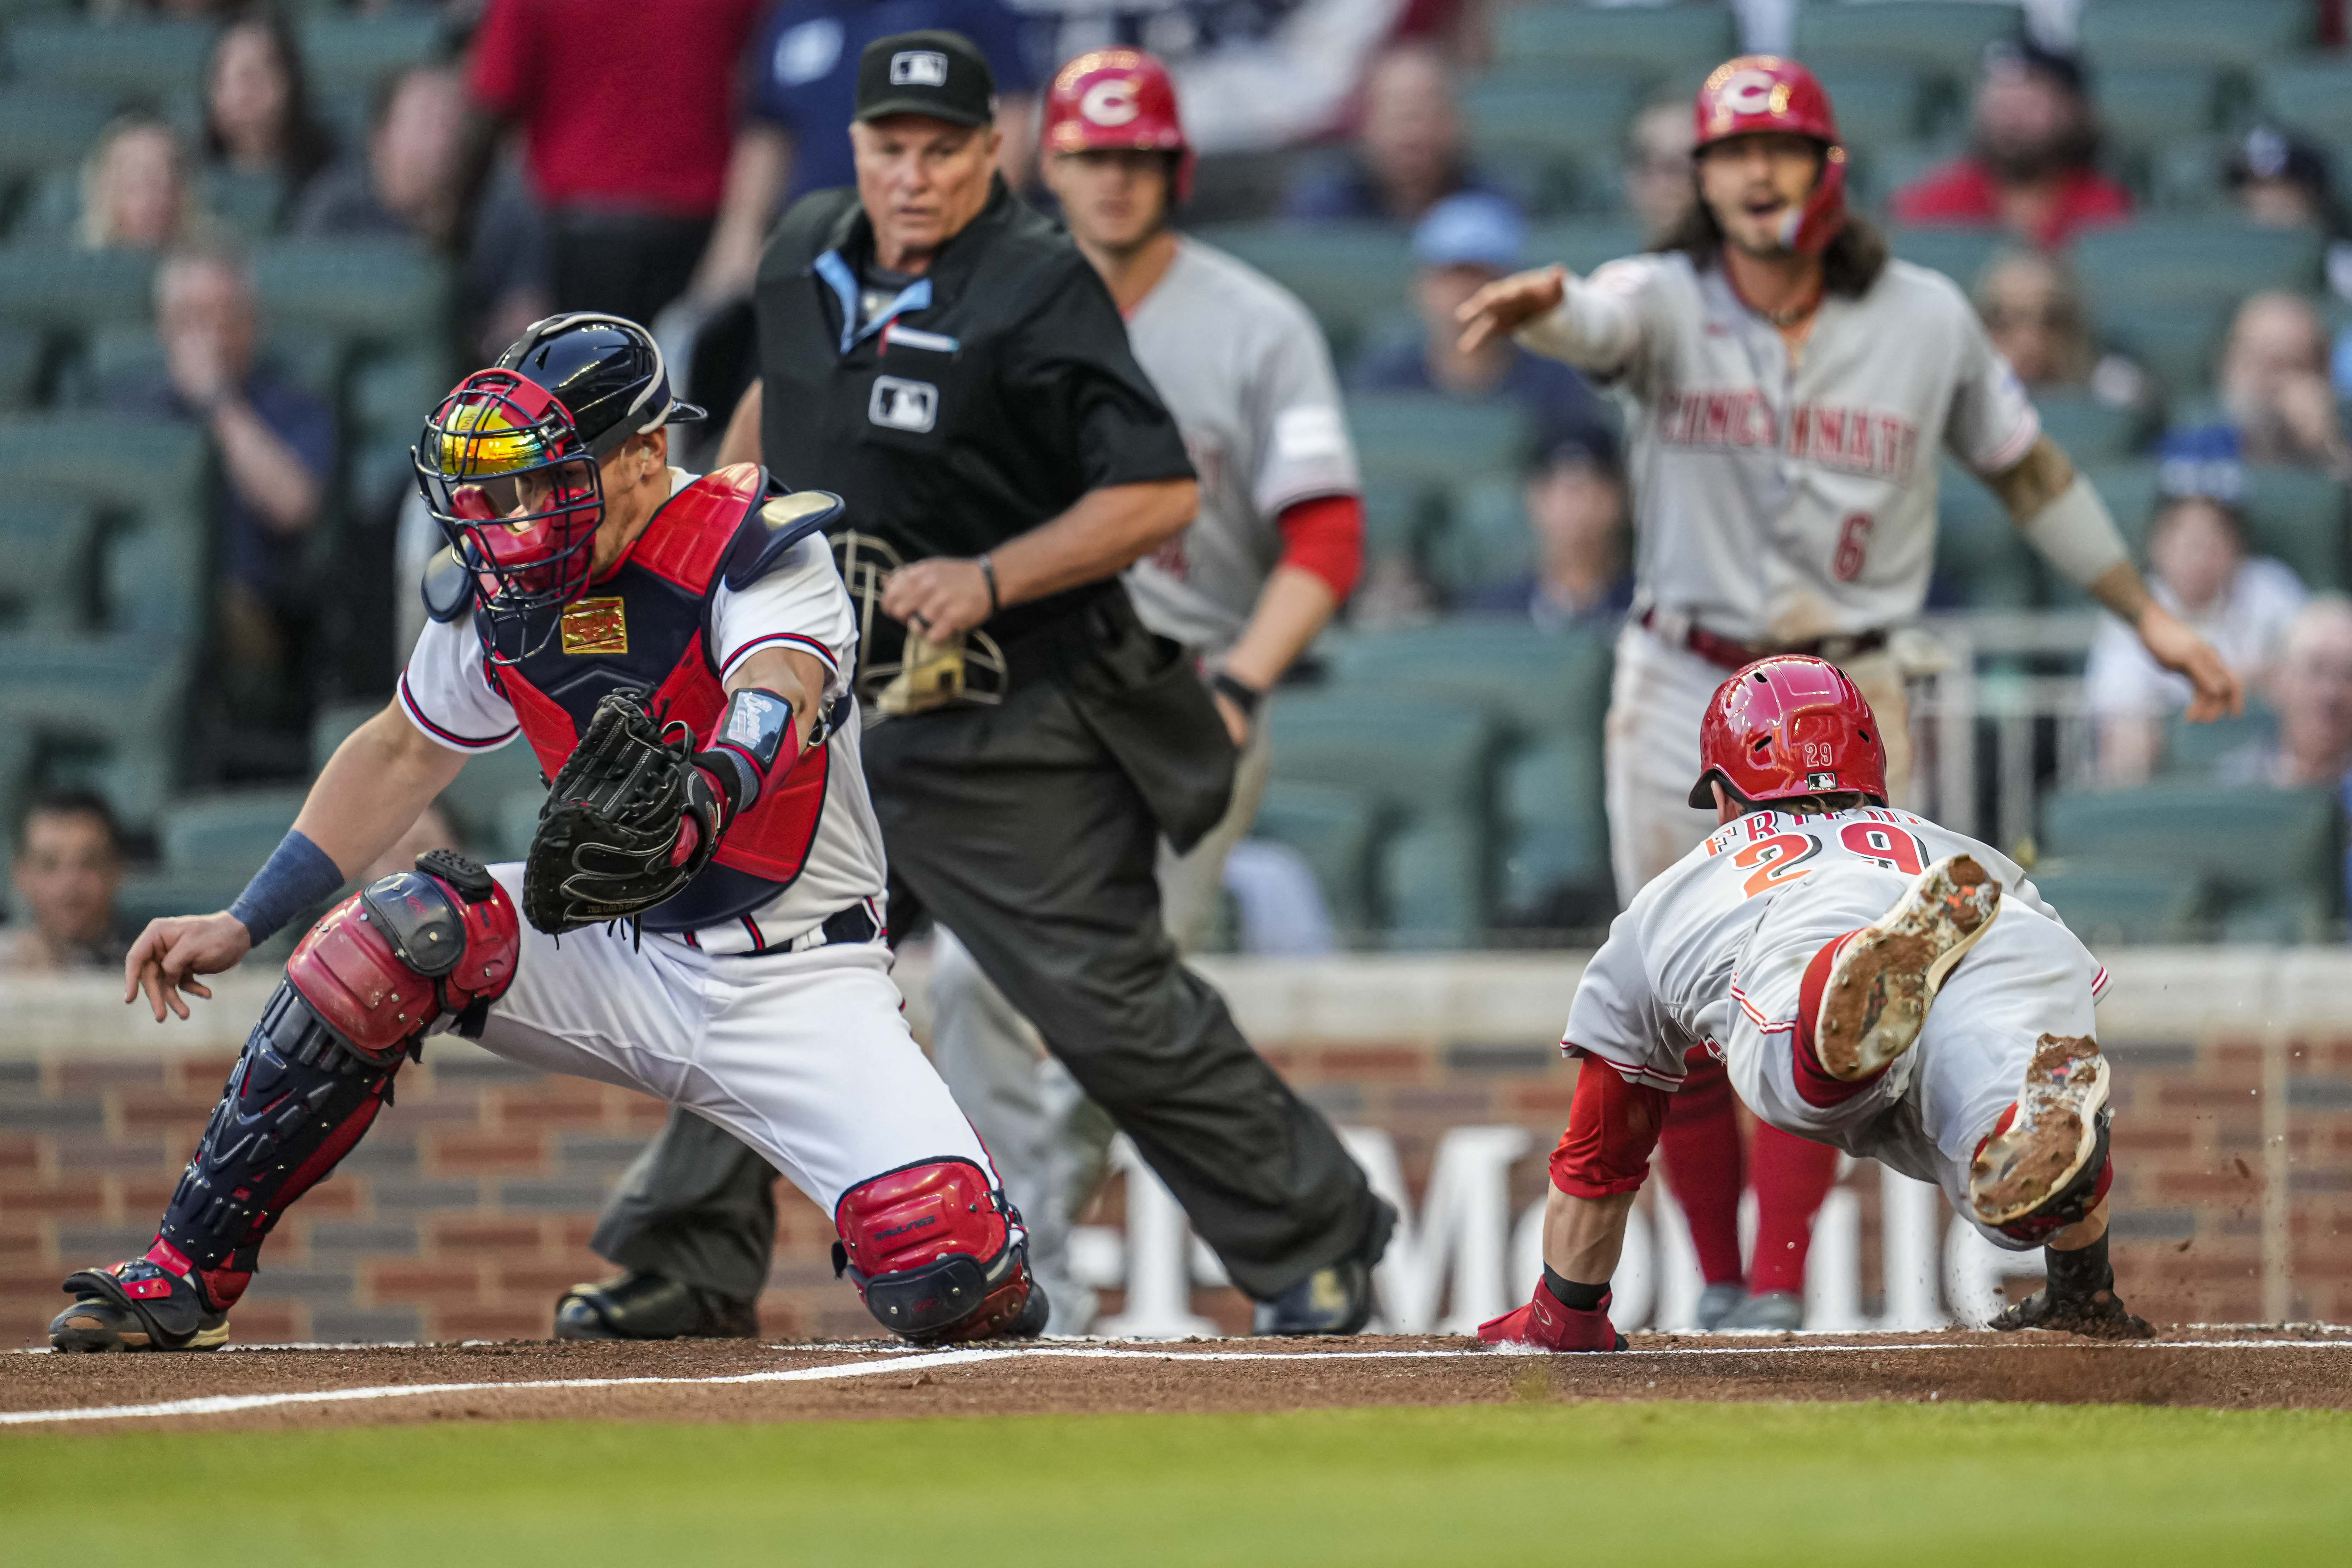 Rosario's tie-breaking HR in 8th sends Braves past Reds, 5-4 - Newsday